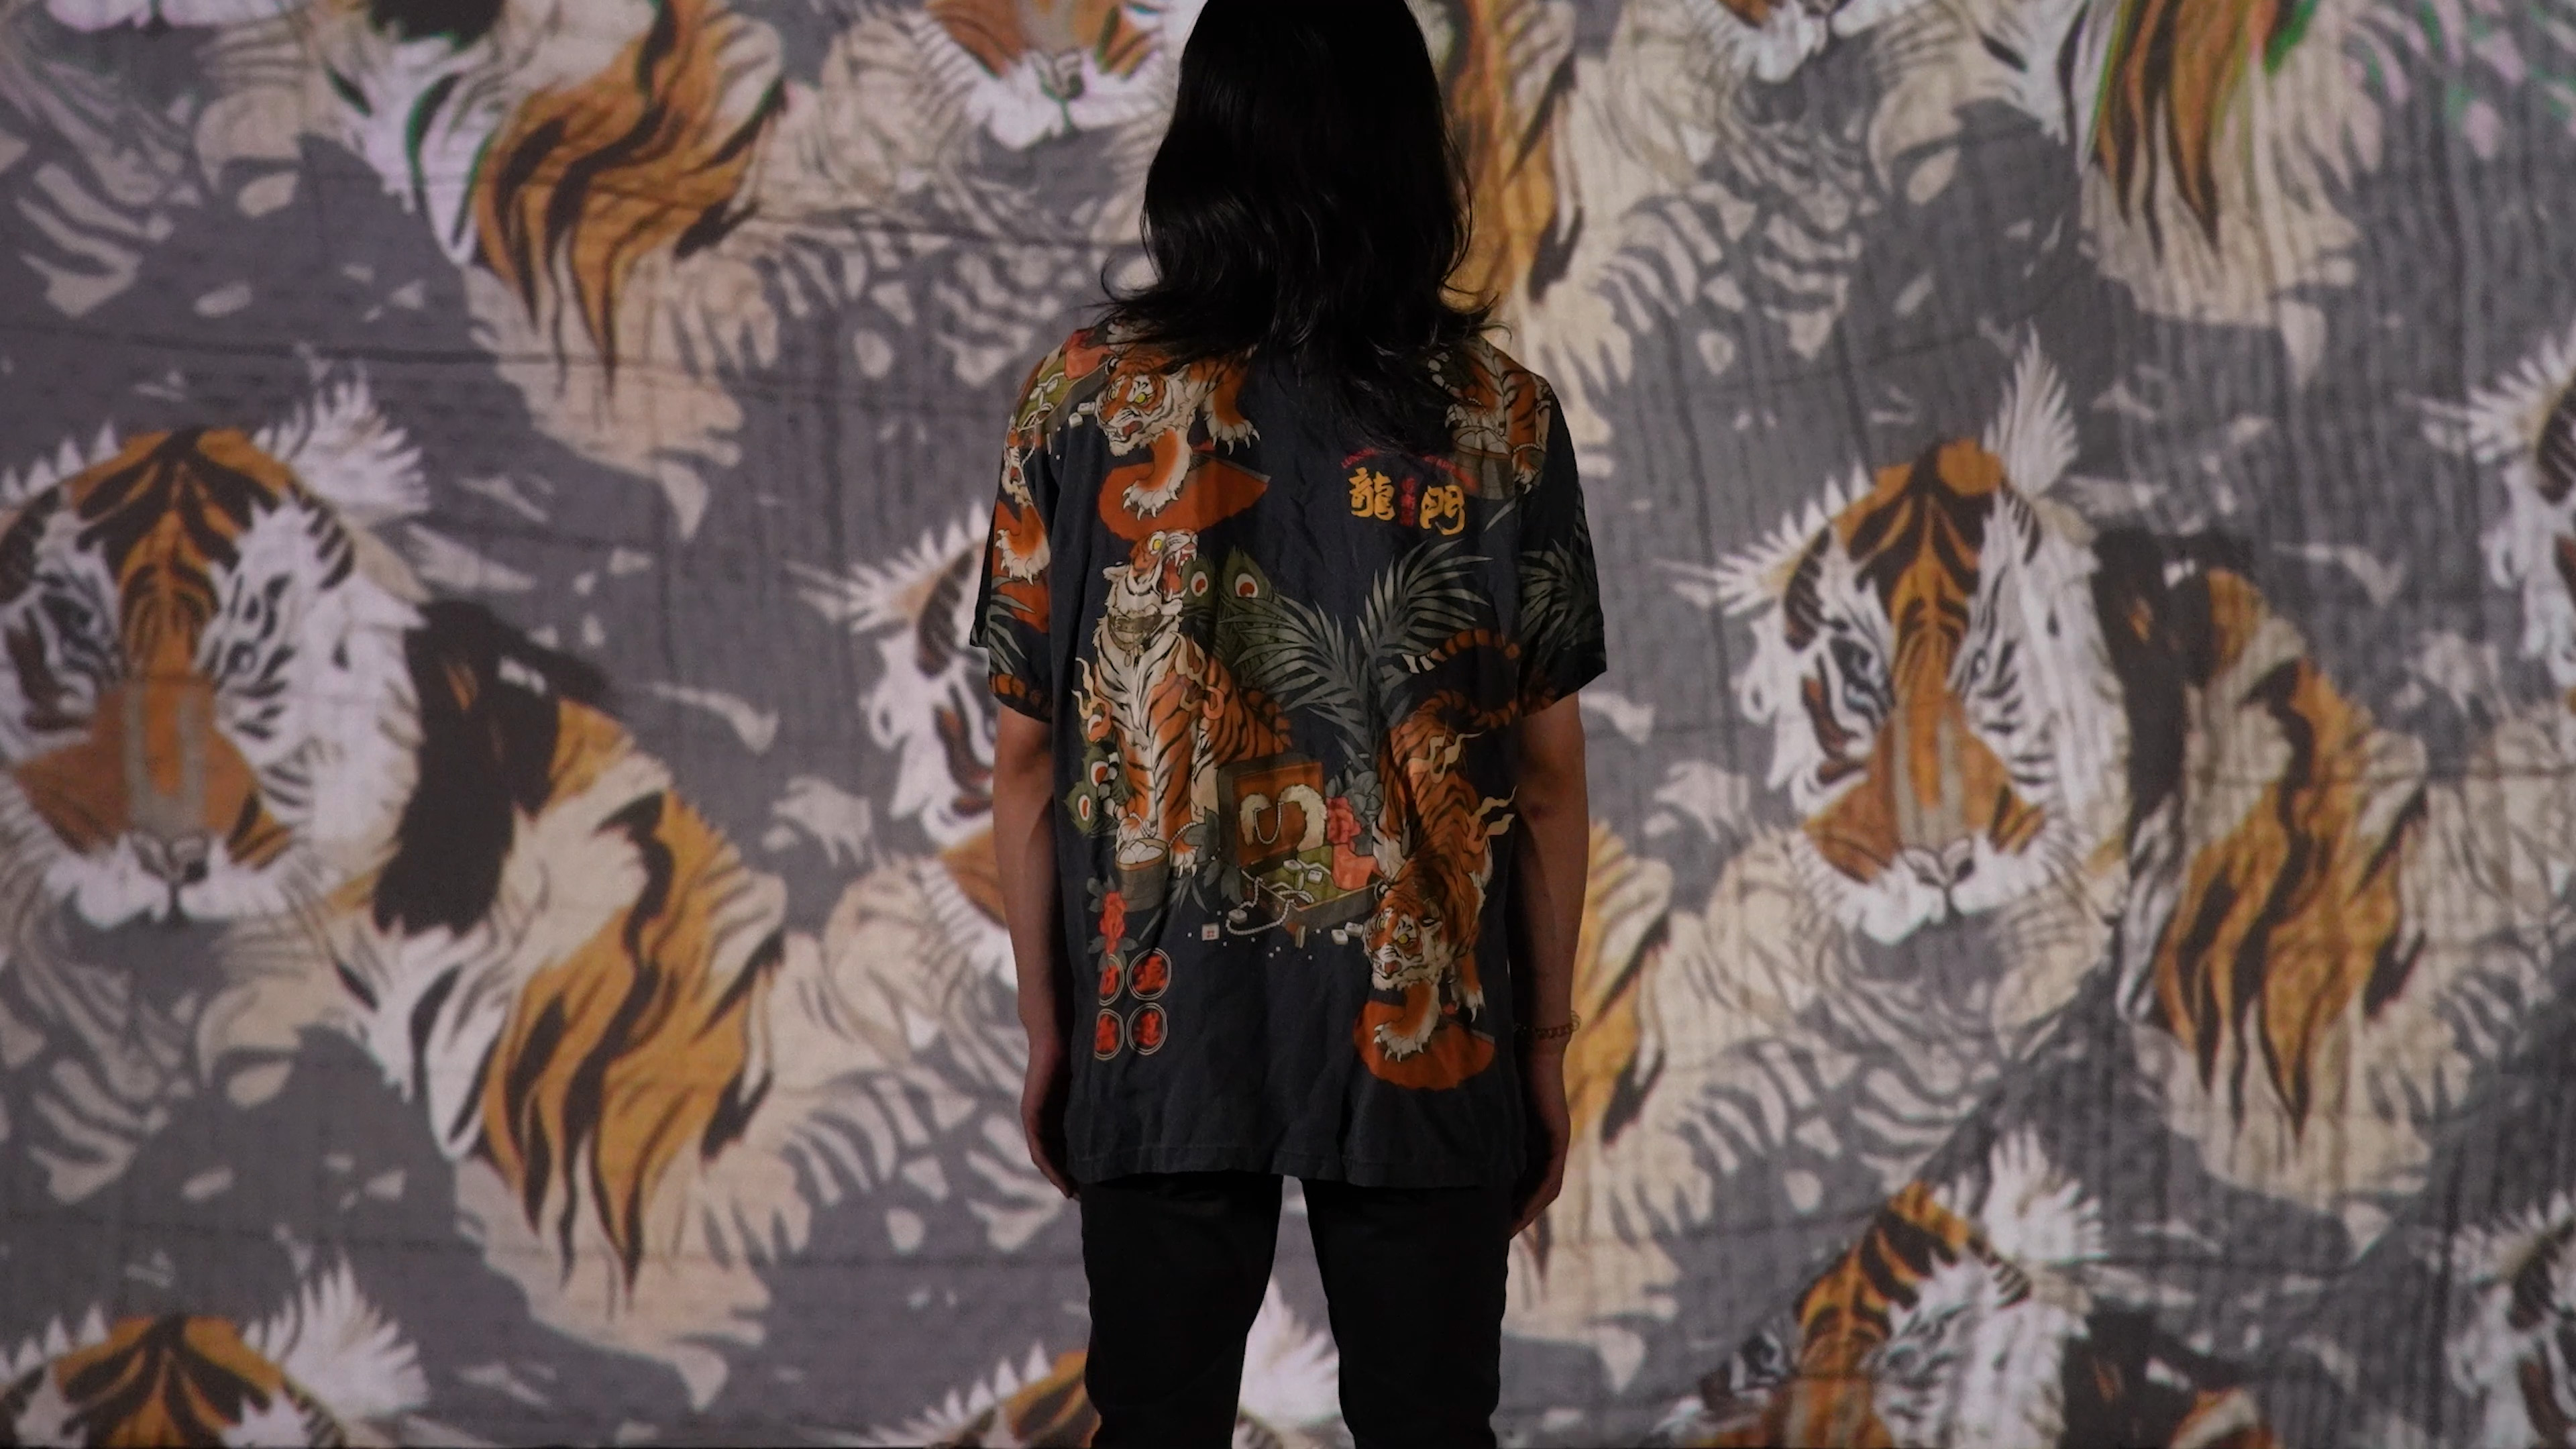 A person in the center of the image is wearing a shirt that includes tigers and palm trees. The projection screen in front of the person displays a similar pattern which was generated by the AI system.